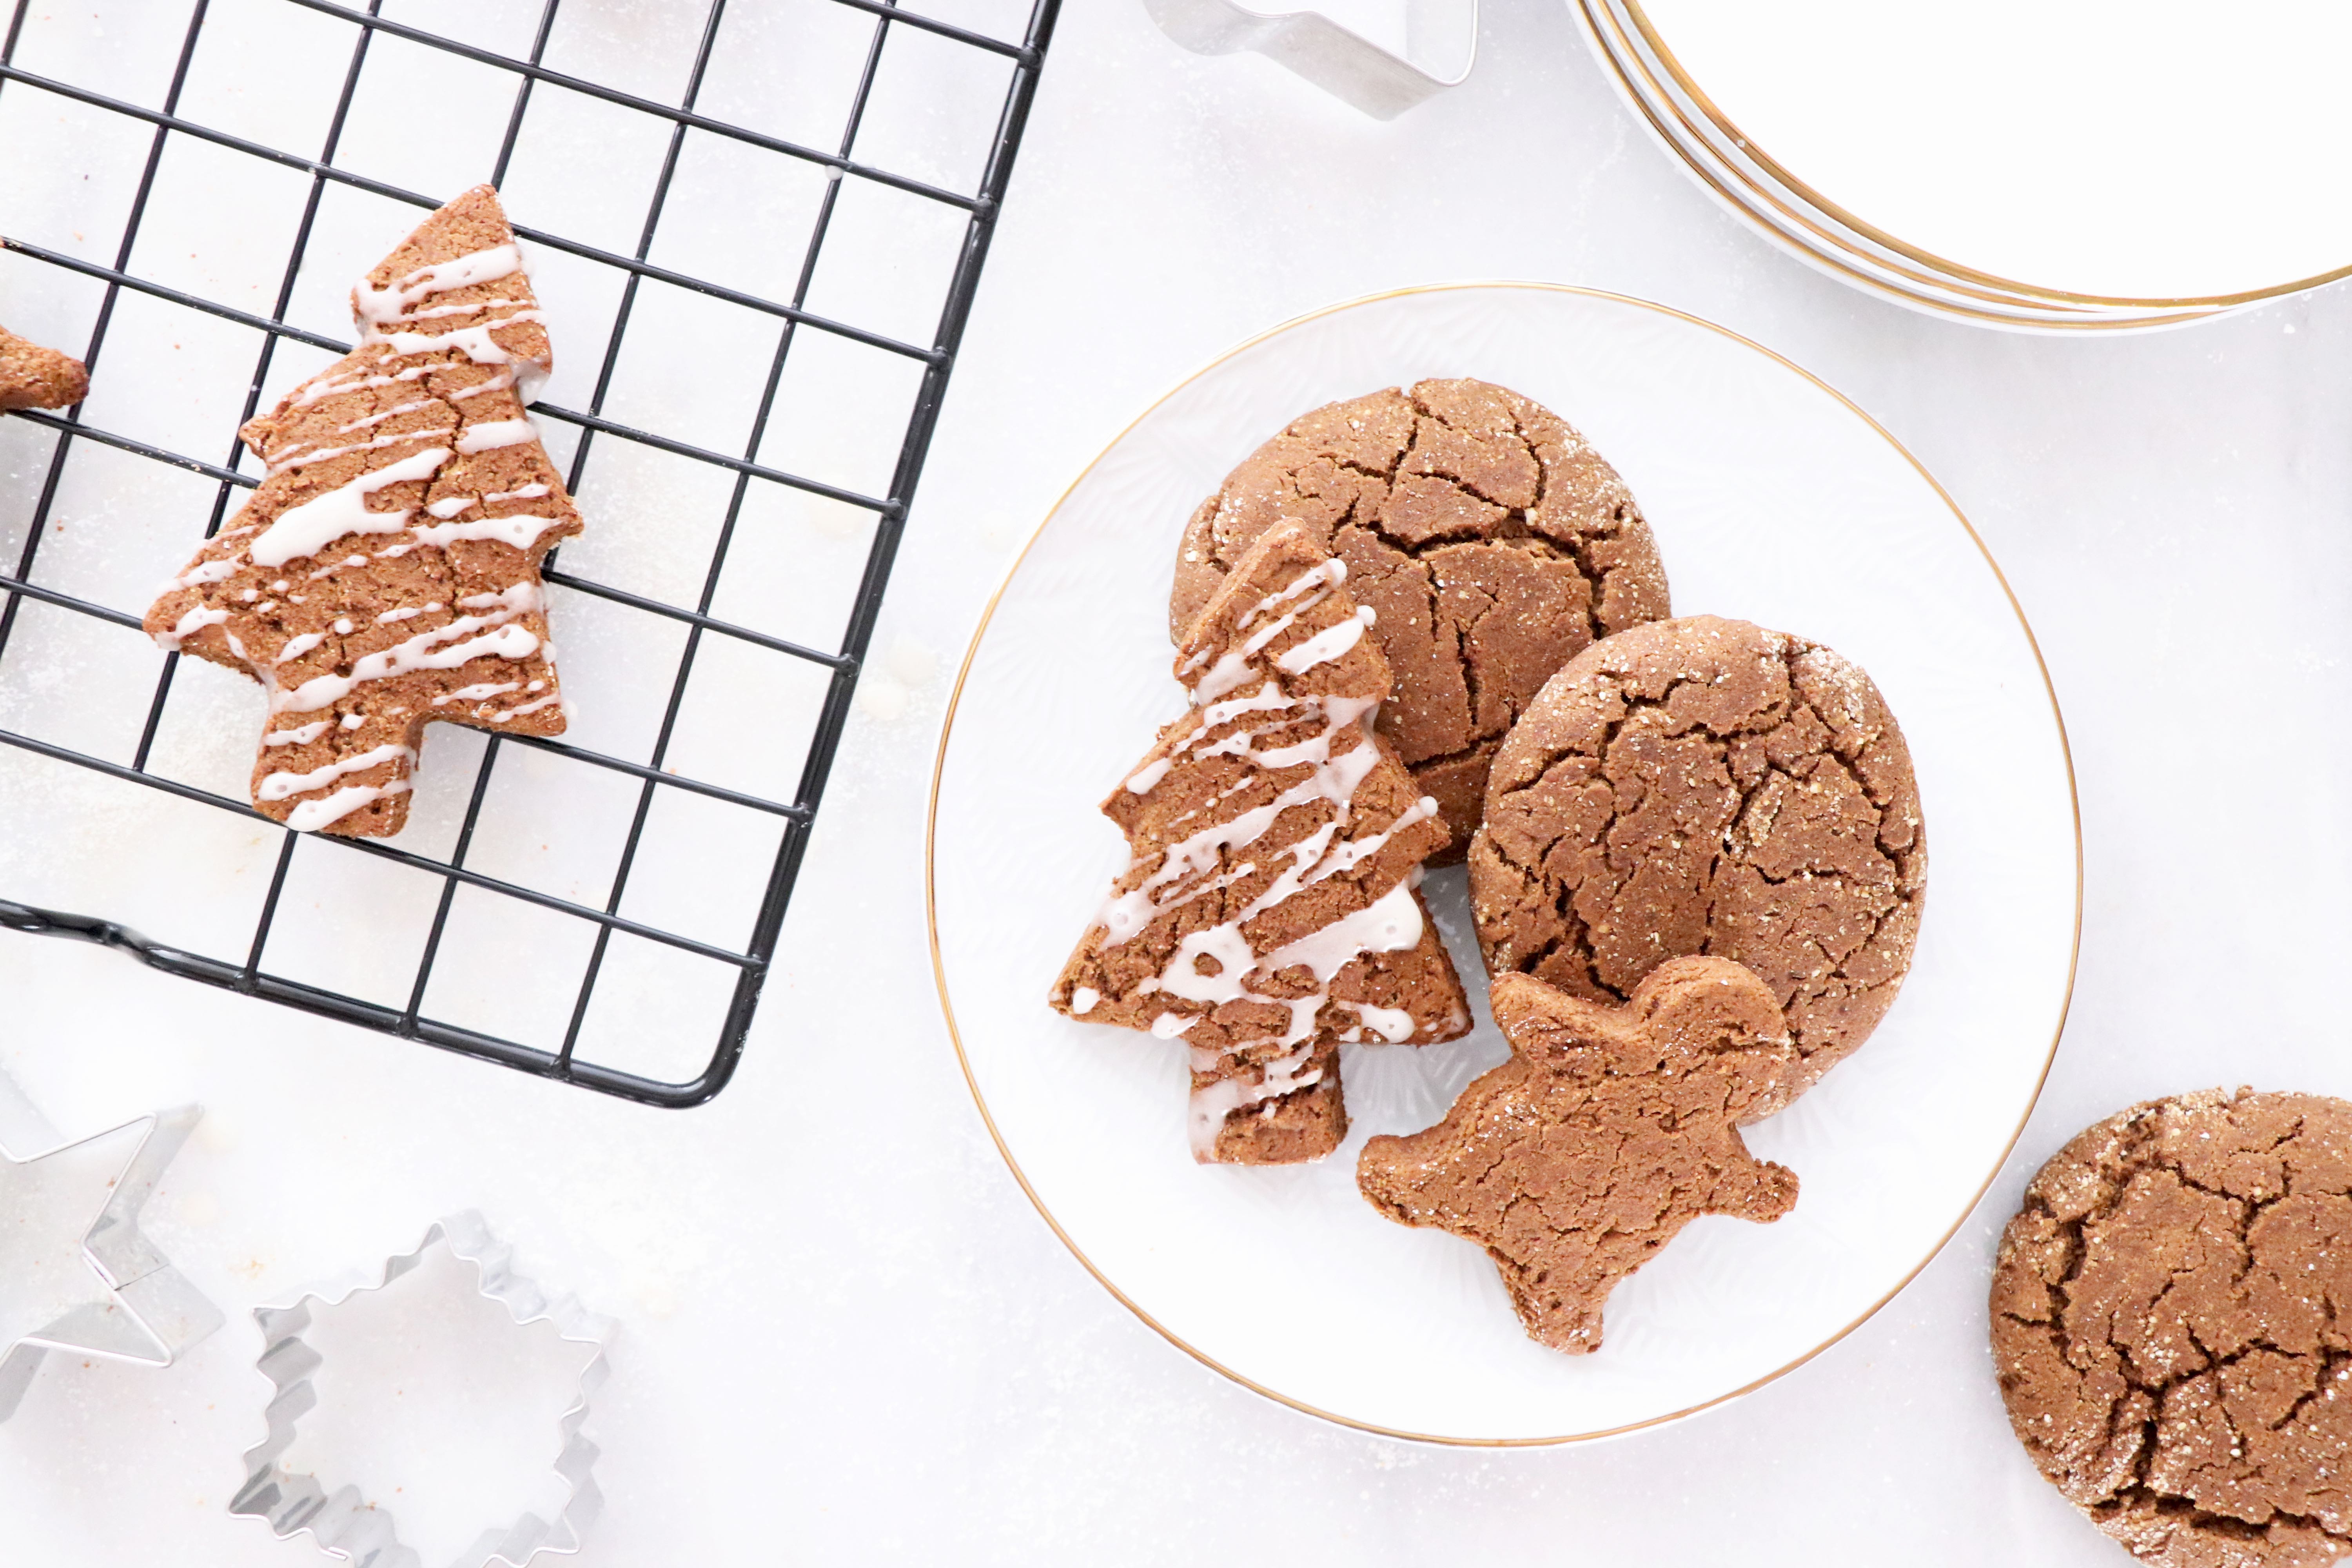 These Gingerbread Cookies Are the Guilt-Free Holiday Treat You Need